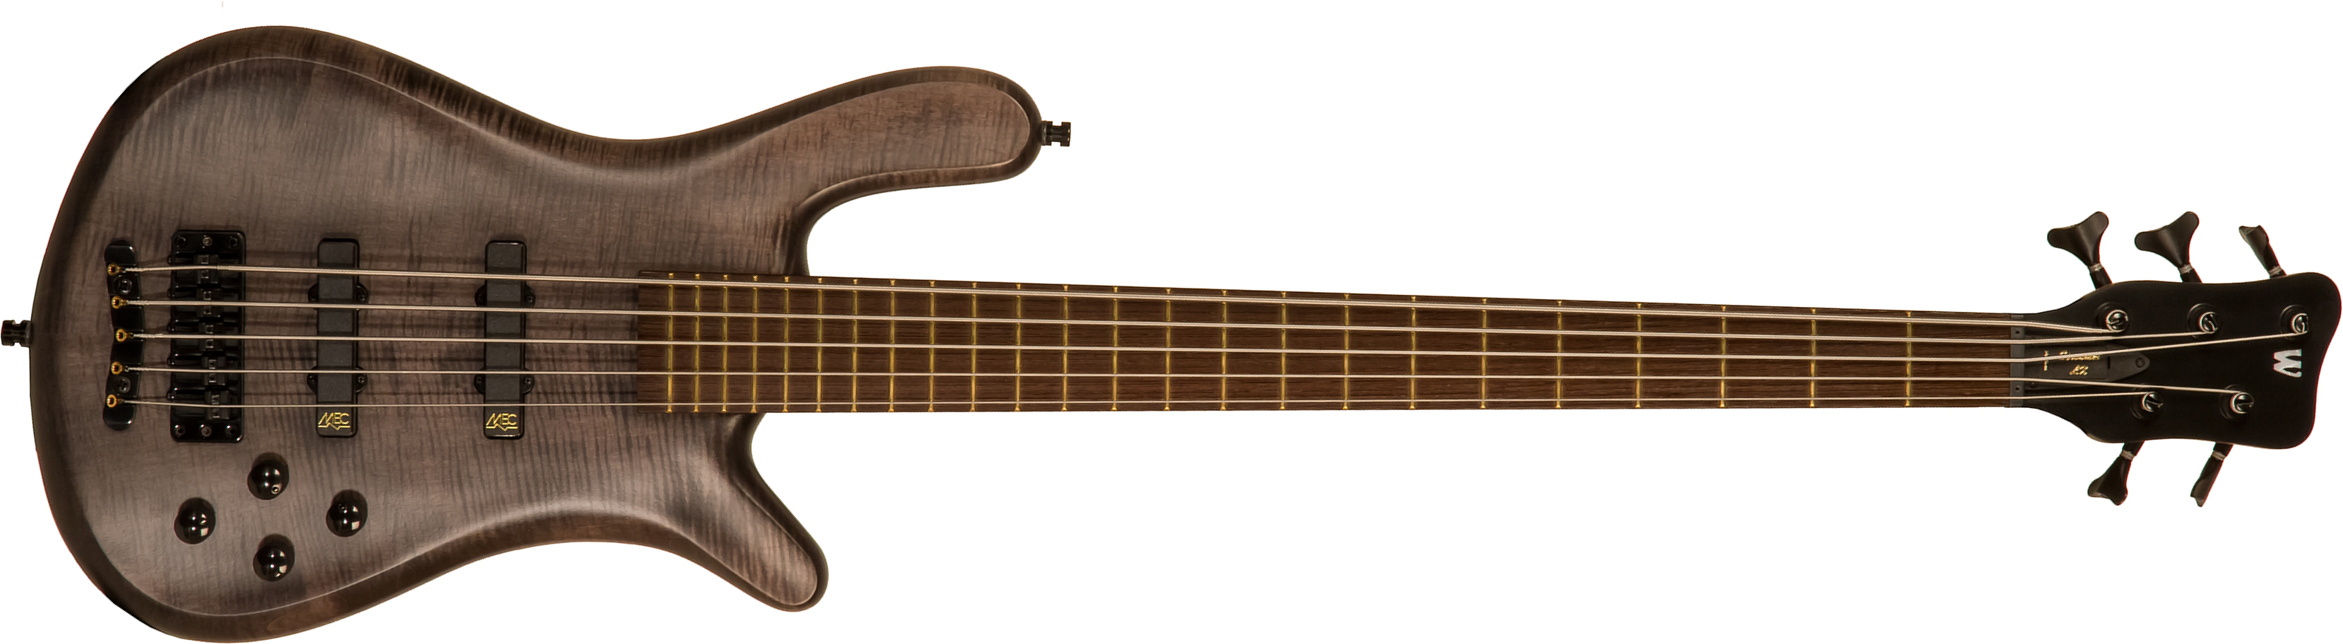 Warwick Streamer Lx5 Pro Gps 5c Active Wen - Maple Nirvana Black Satin - Solid body electric bass - Main picture